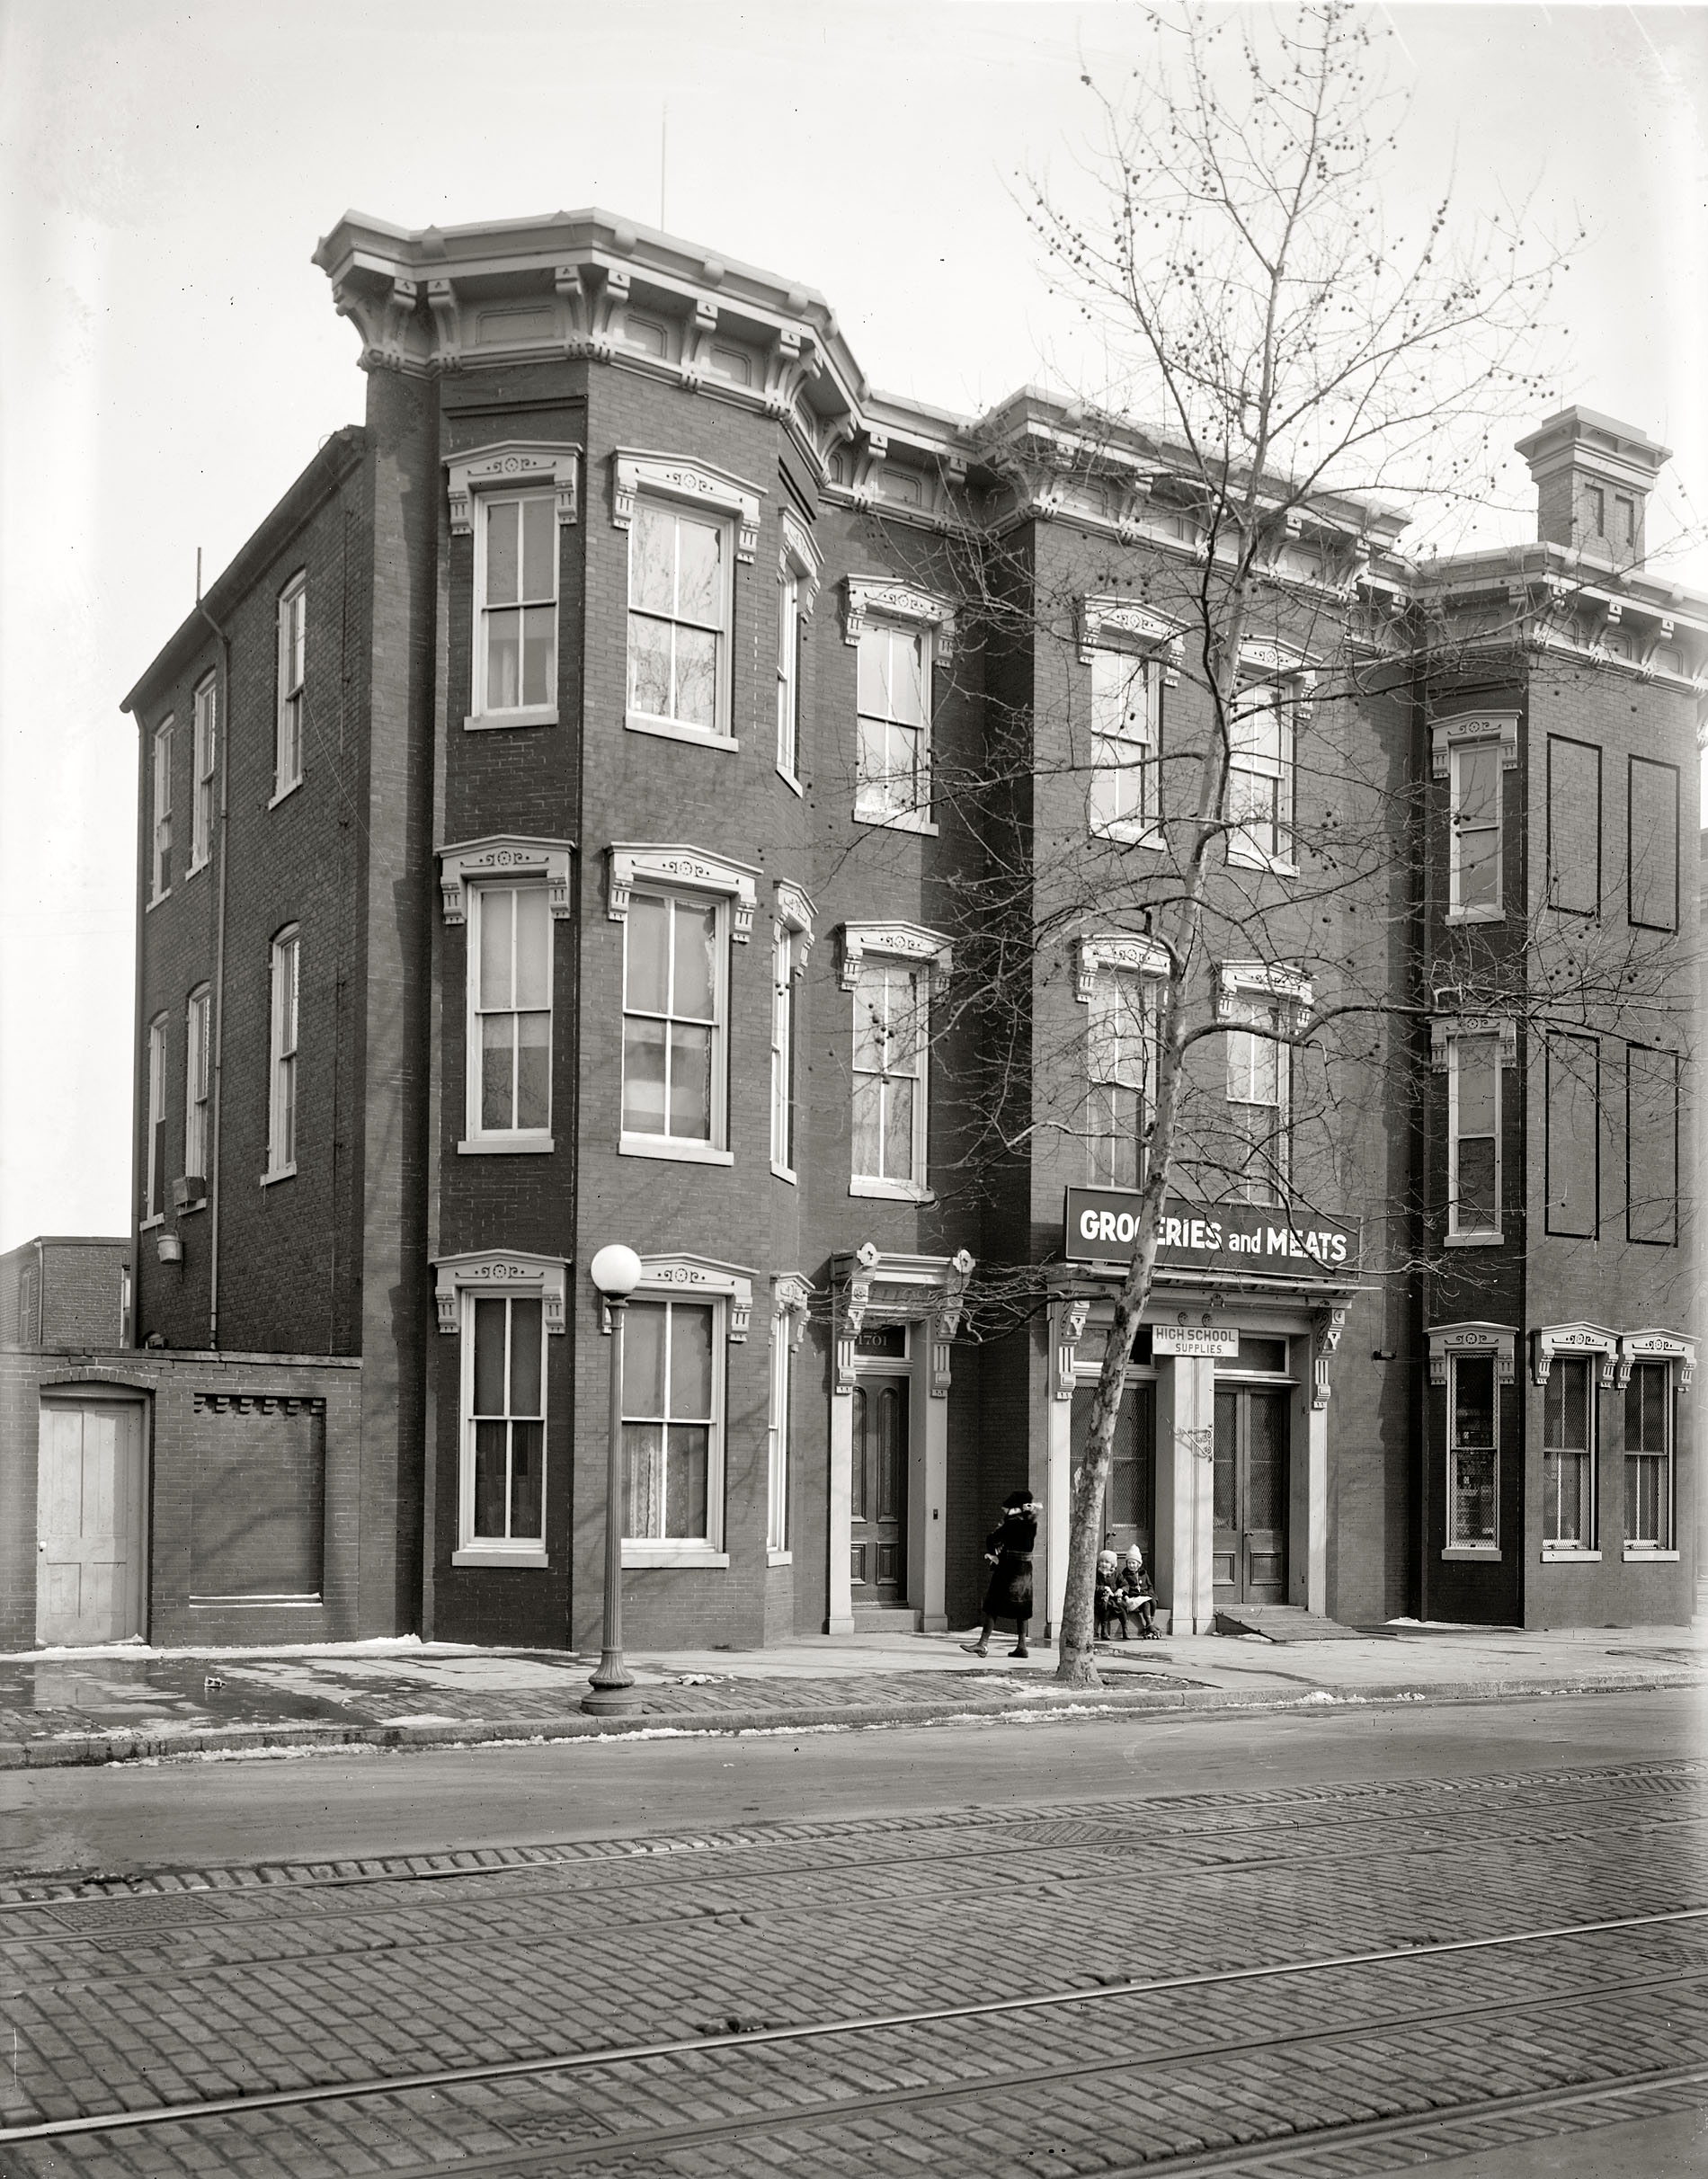 "1701 9th St. N.W., Washington." 1919 or 1920. It seems to be skating weather. National Photo Company Collection glass negative. View full size.